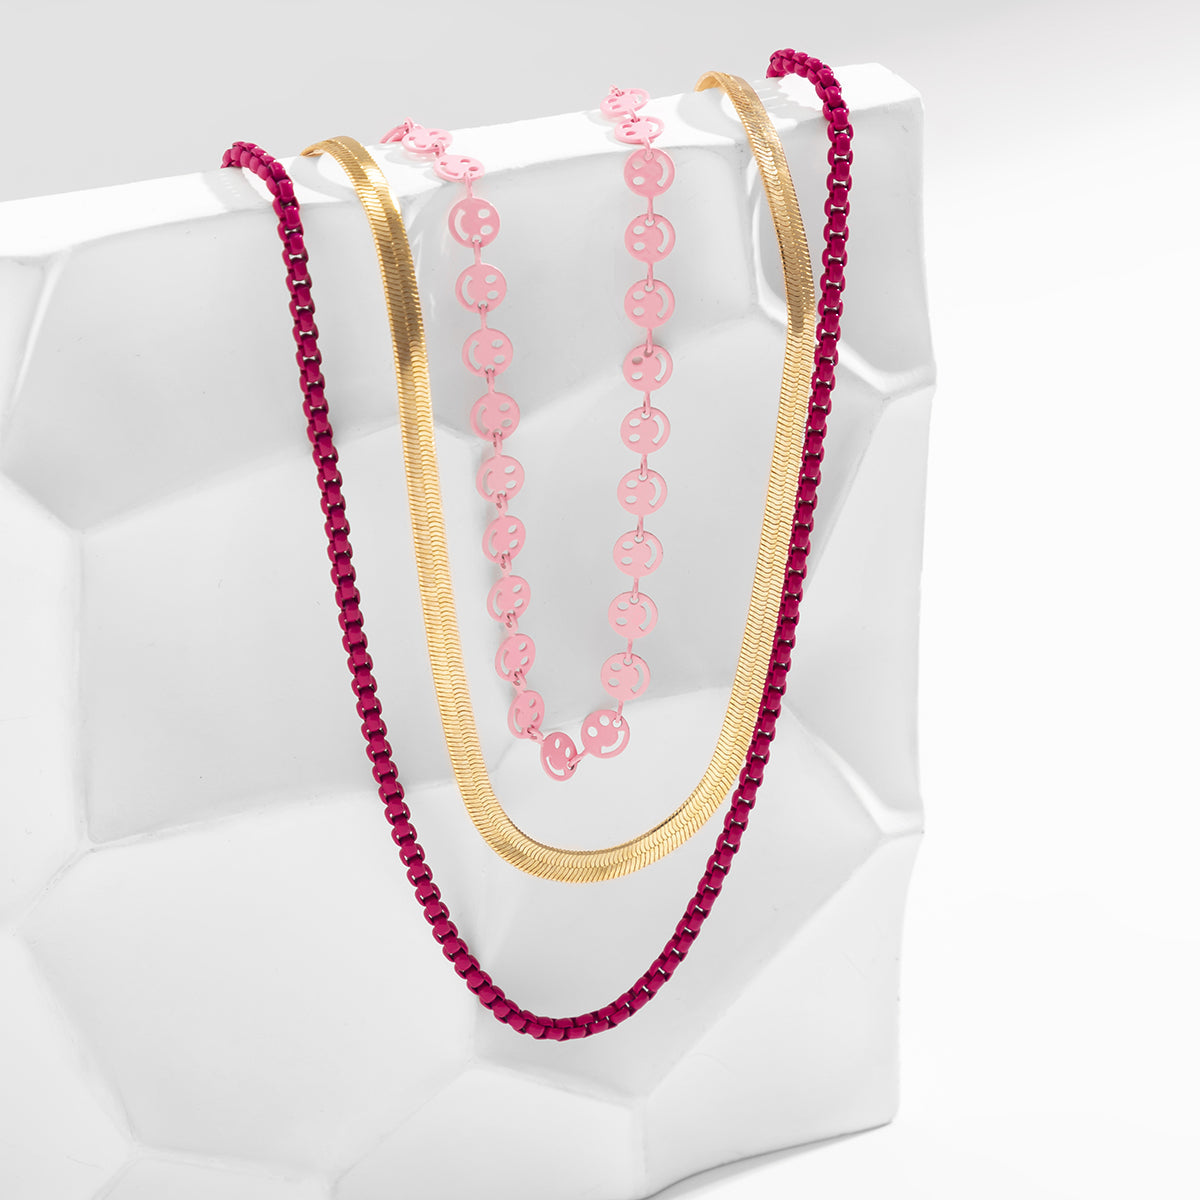 Red Enamel & 18K Gold-Plated Smiley Snake Chain Necklace Set